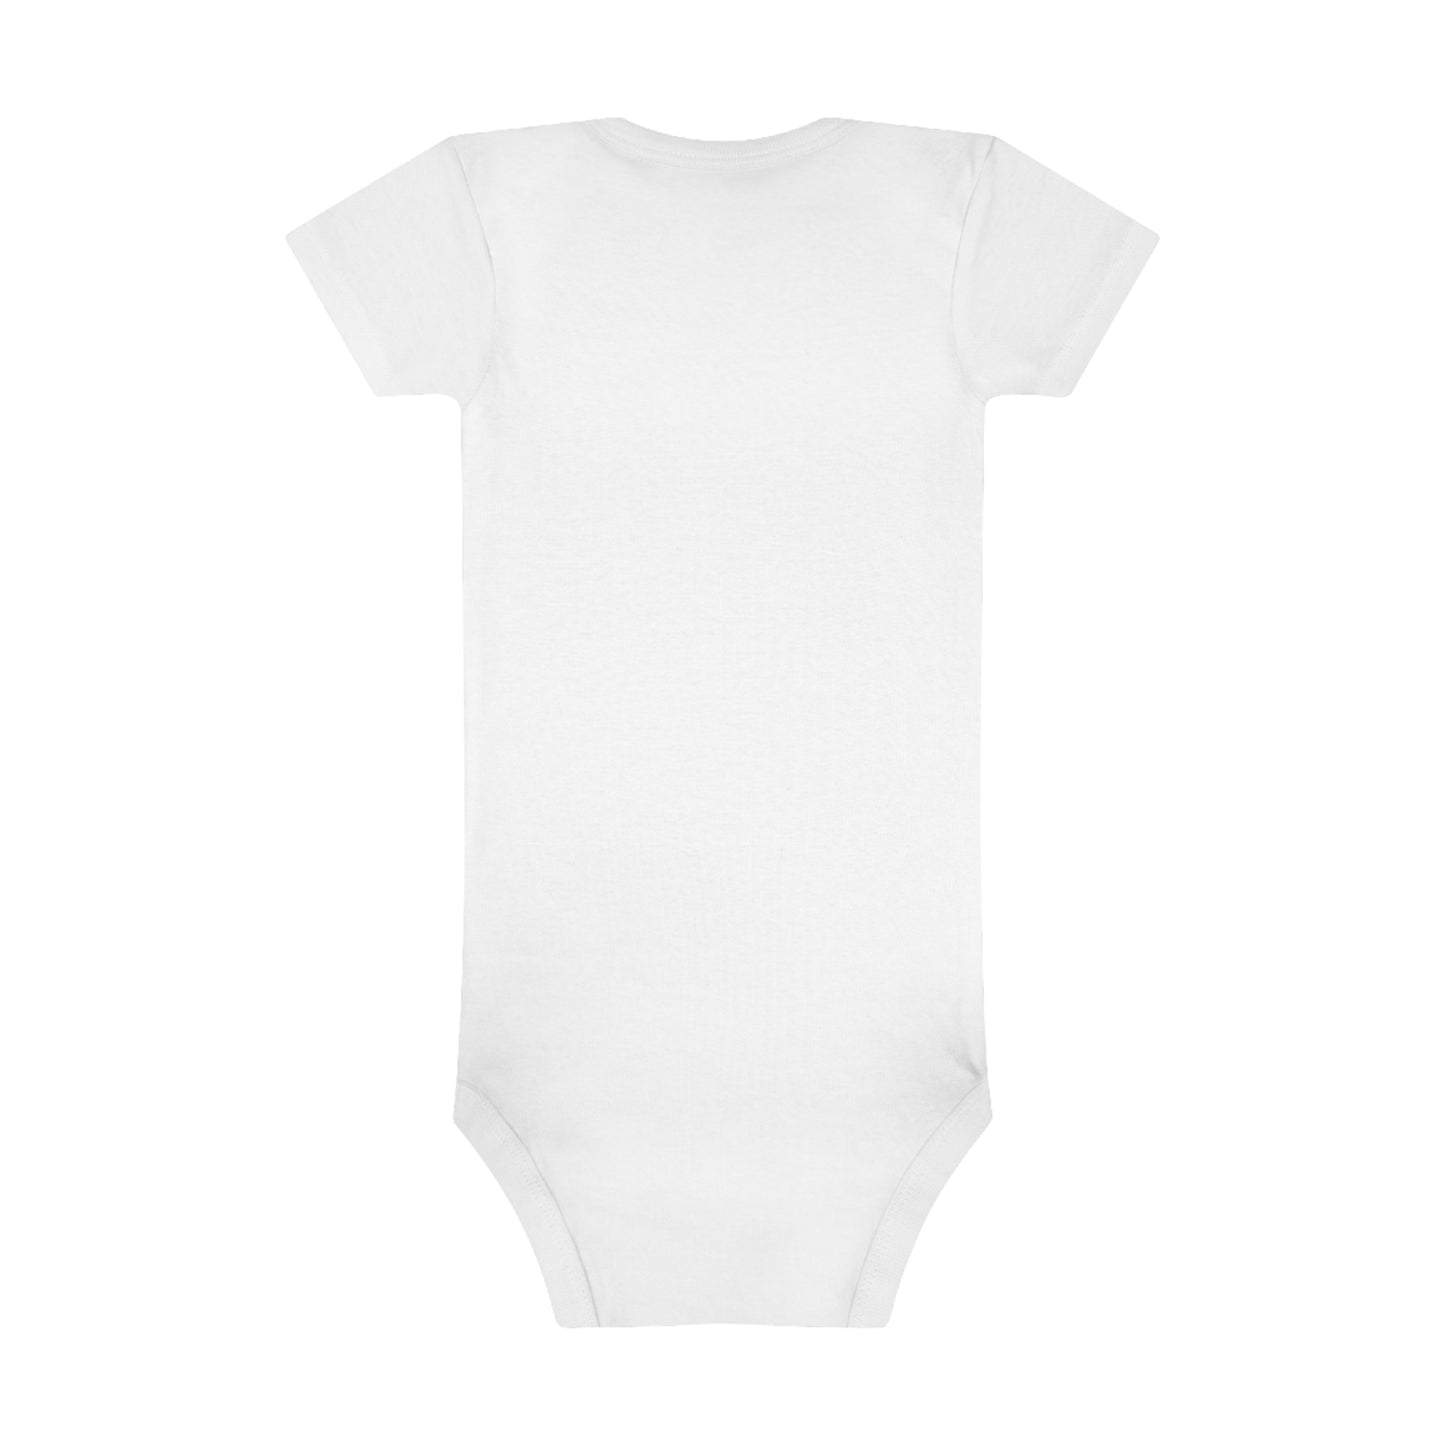 Light Passers Marketplace "Give me a HUG" Onesie® Organic Baby Bodysuit in white Simple Messages, Mental Health